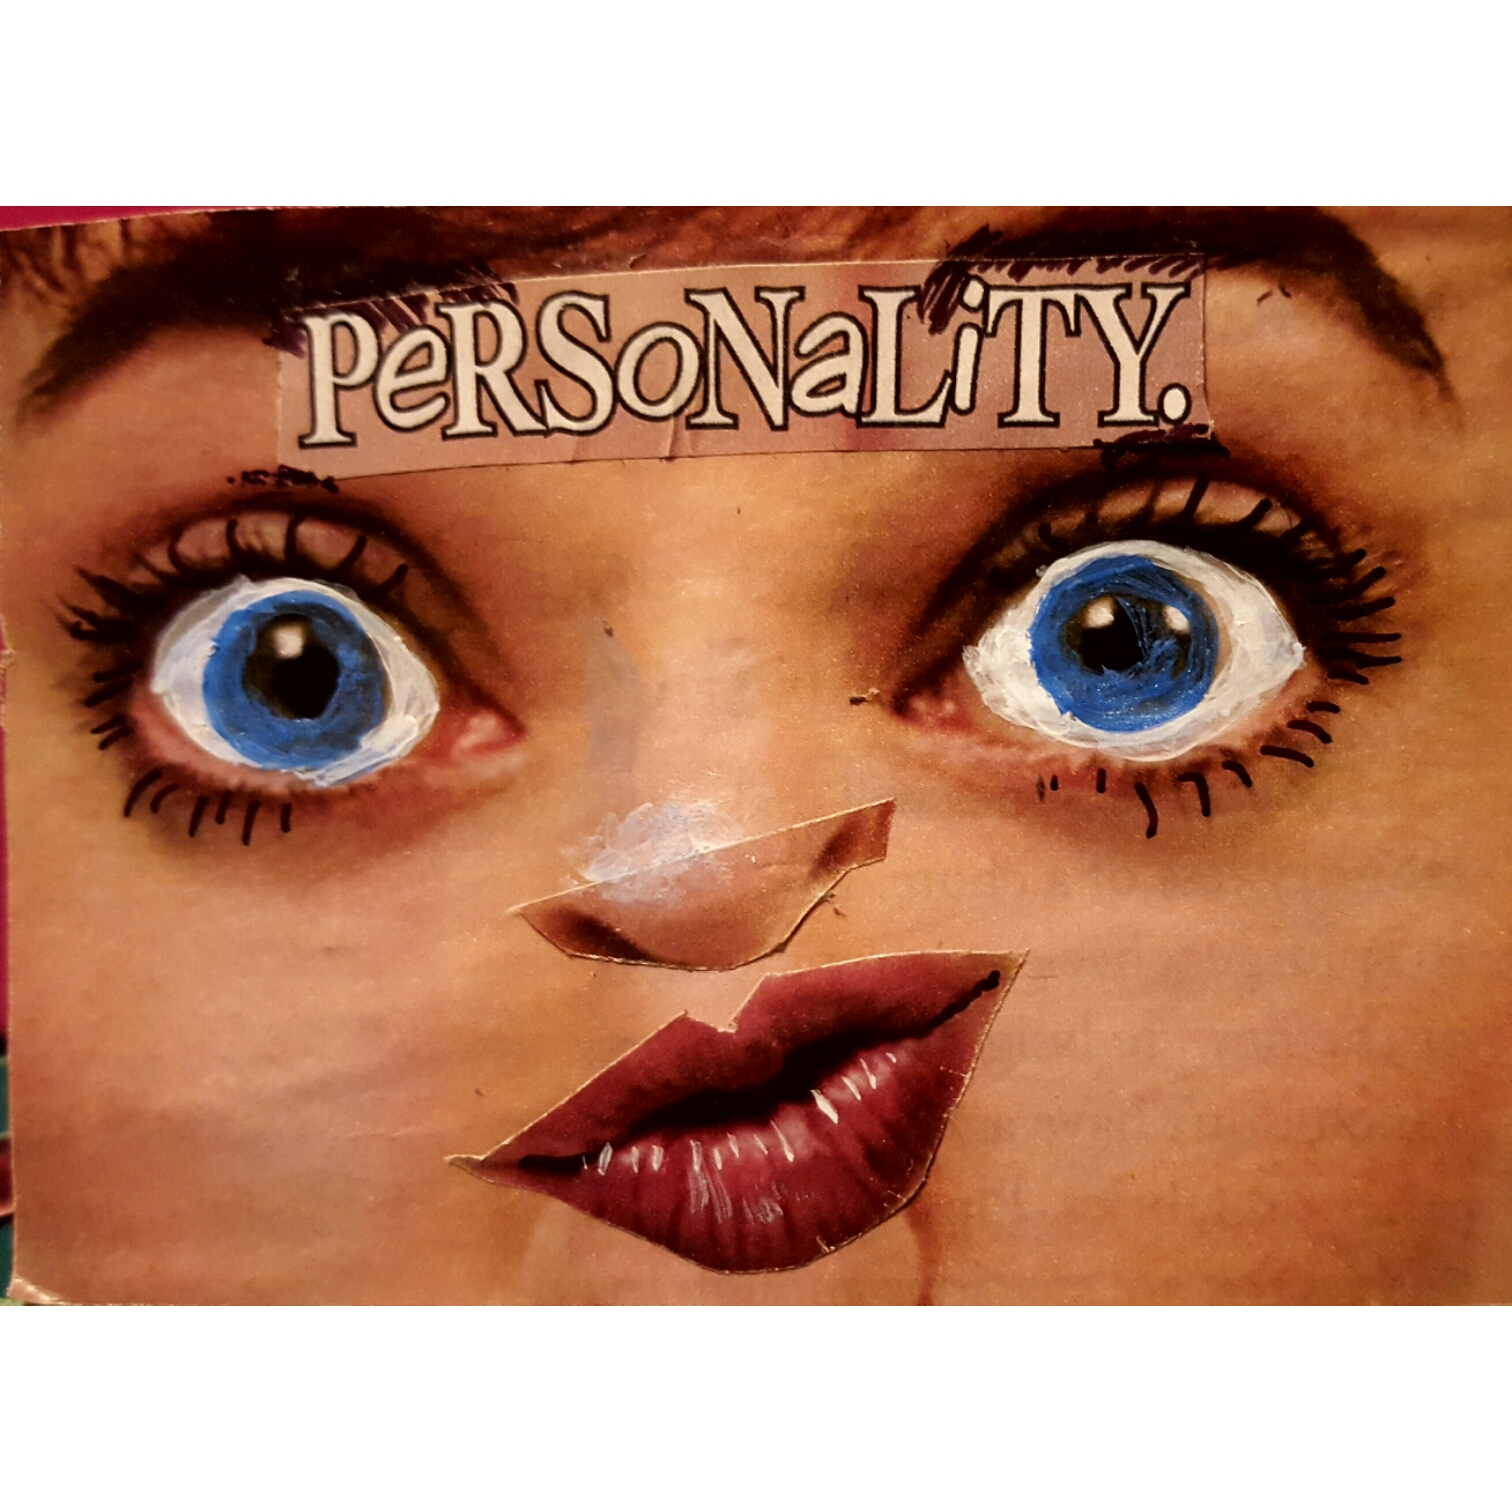 PeRSoNaLiTy